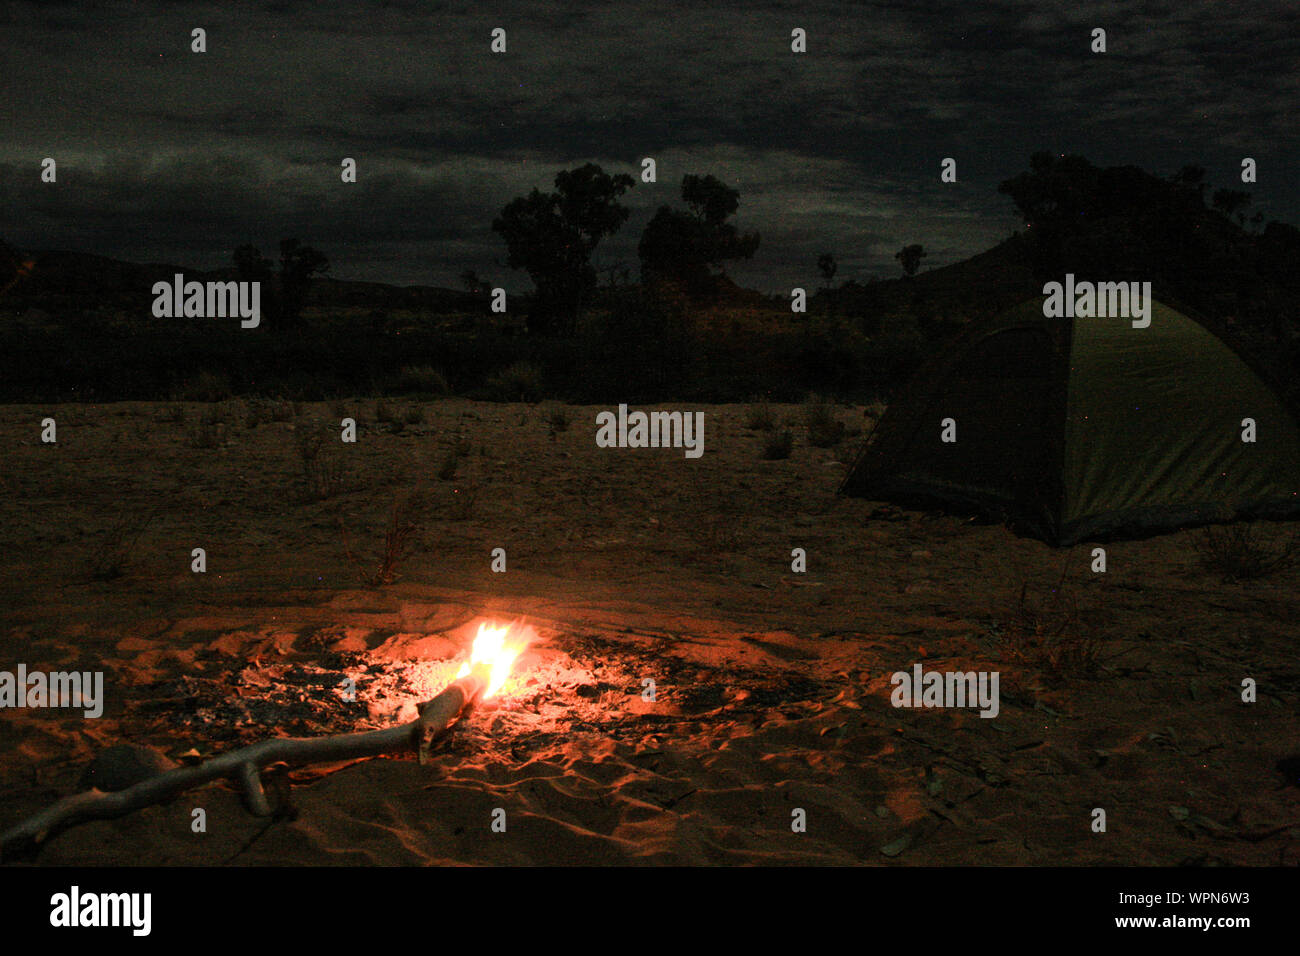 Camping with a nice Campfire next to Alice Springs, Northern Territory, Australia, night time shot Stock Photo